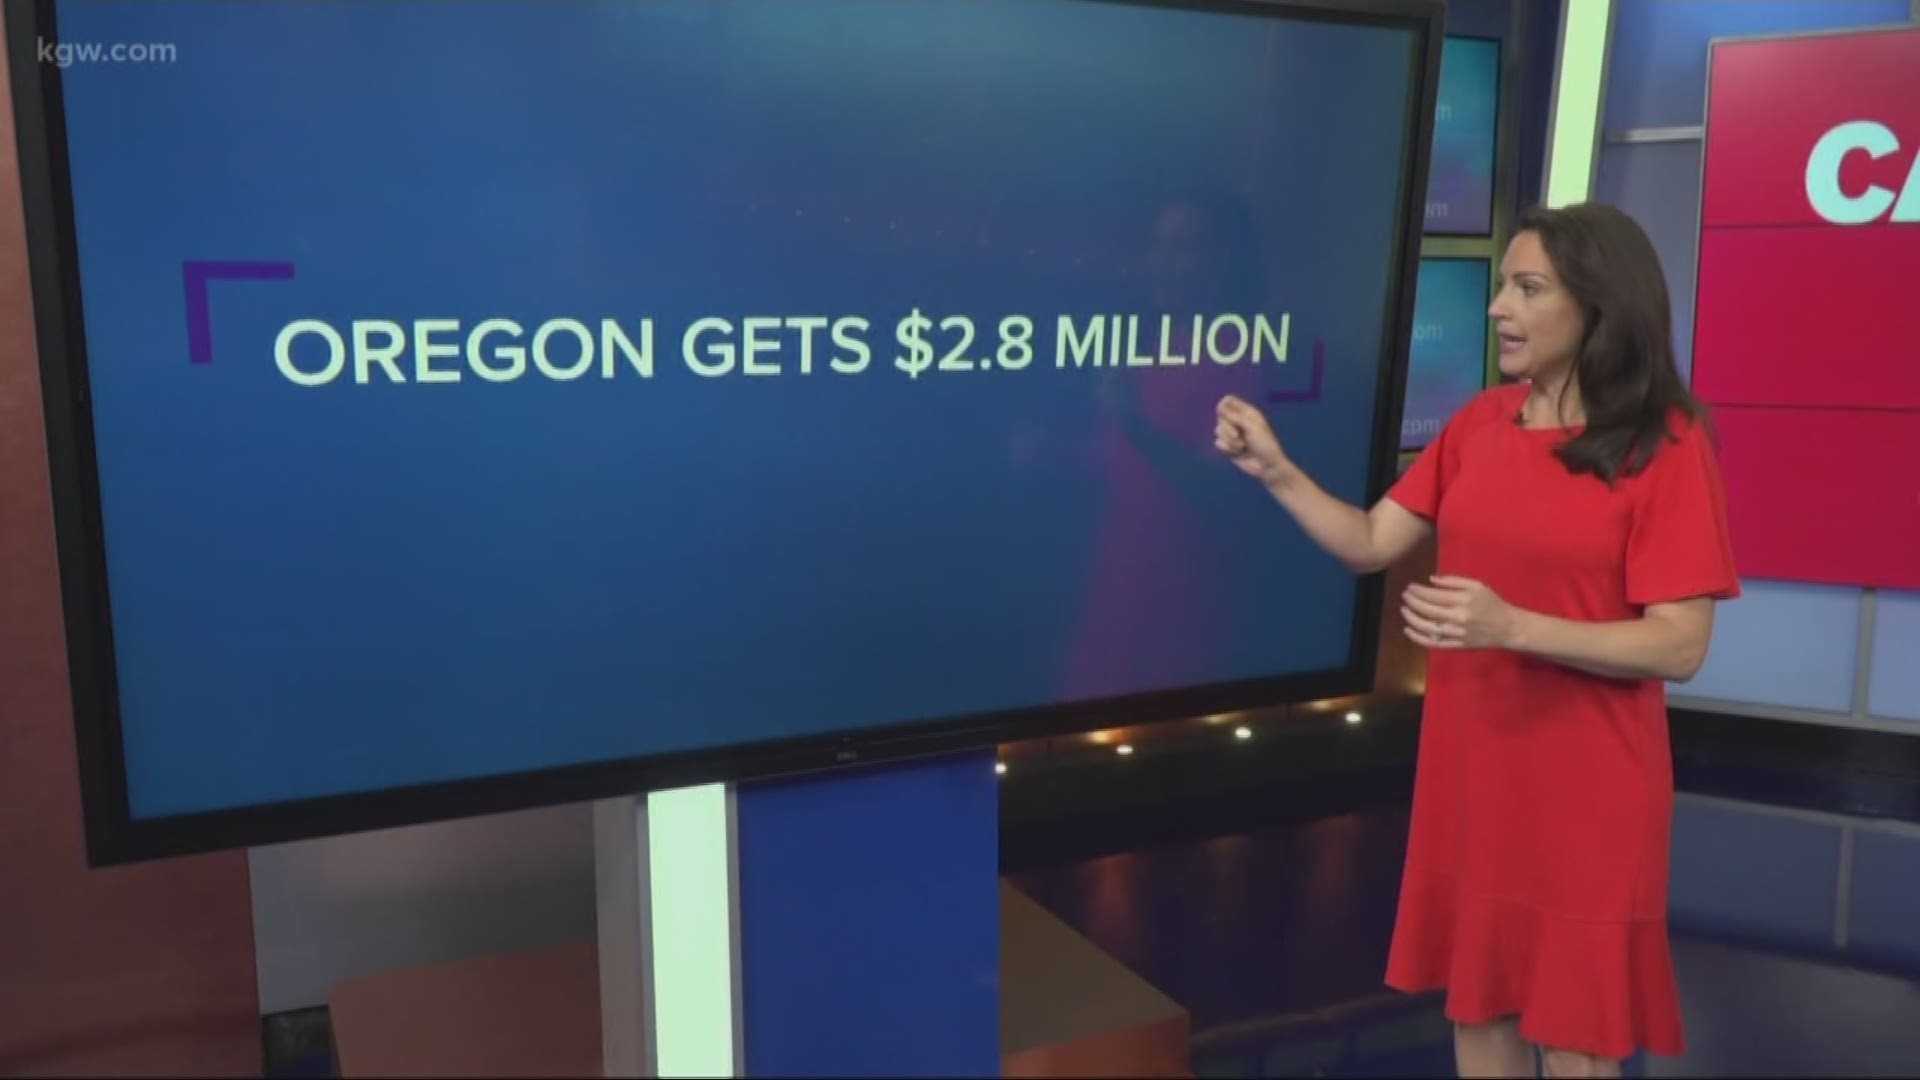 Oregon received $2.8 million in a settlement with Equifax.